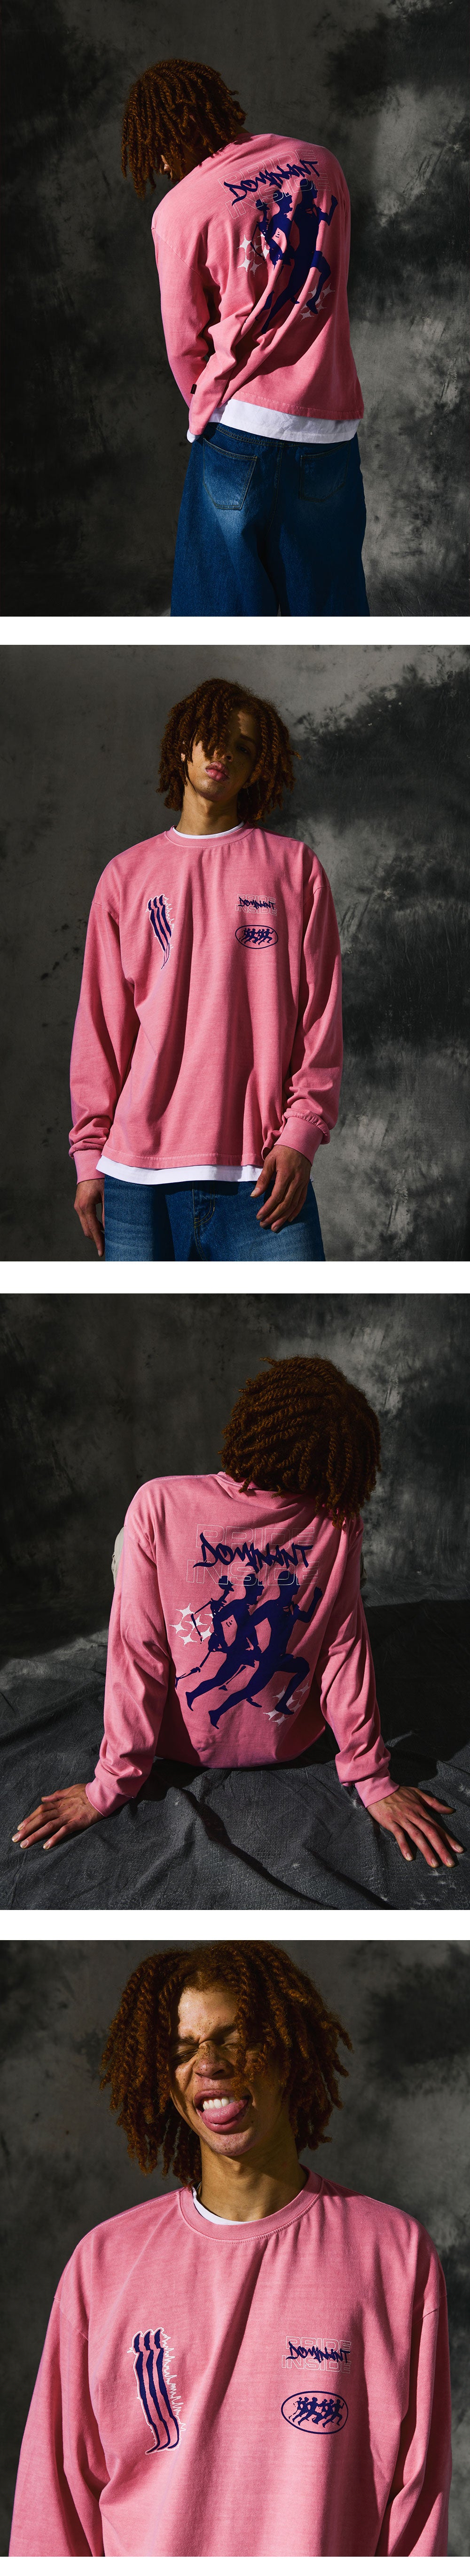 [16s Cotton]RP Pigment Washing Long Sleeve_Blossom Pink